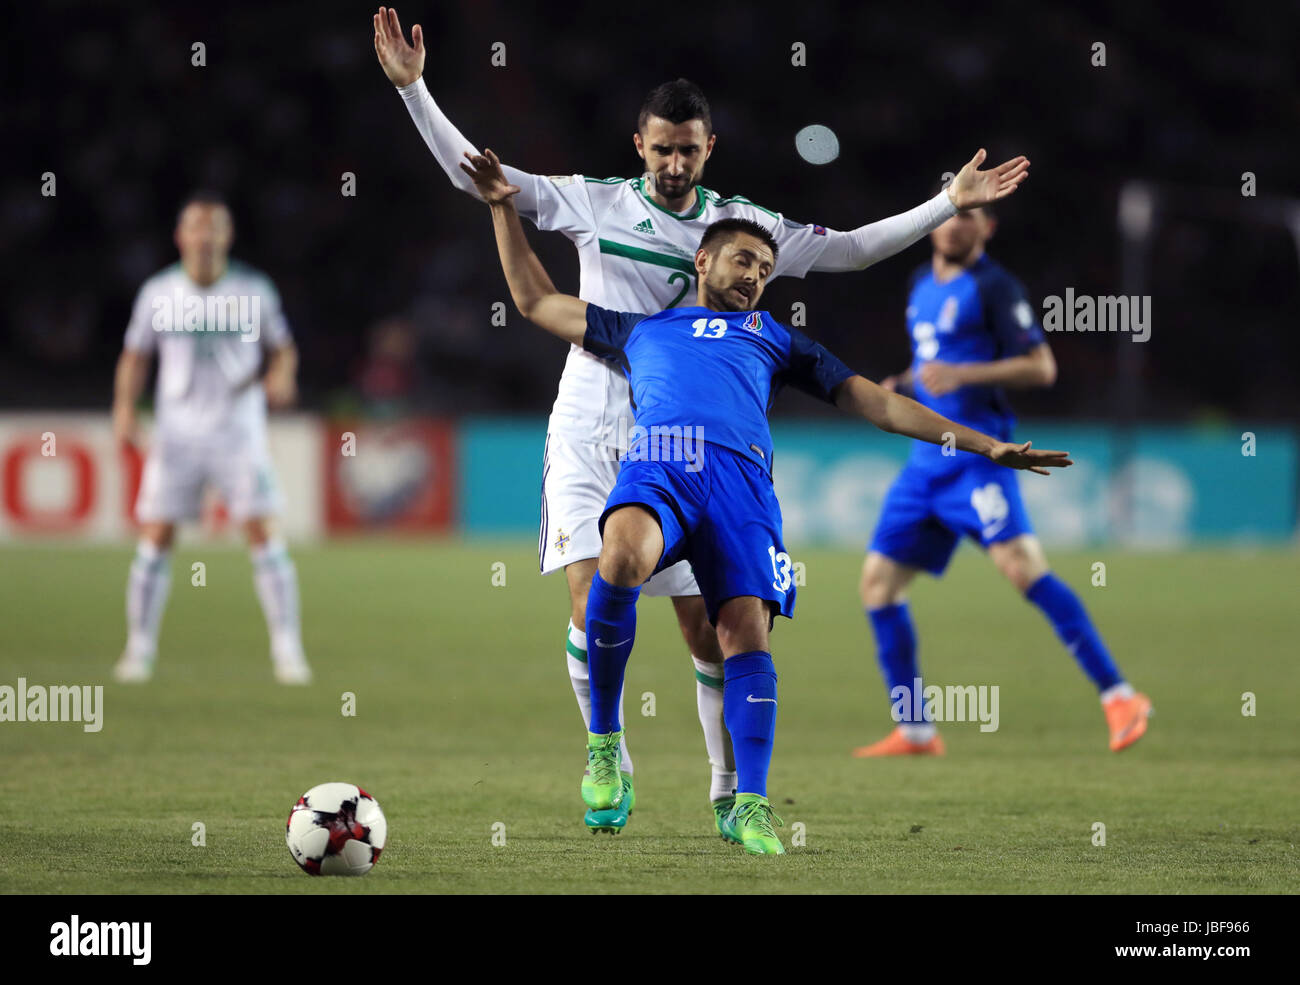 Northern Ireland's Conor McLaughlin (left) and Azerbaijan's Dimitrij Nazarov battle for the ball during the 2018 FIFA World Cup qualifying, Group C match at the Tofik Bakhramov Stadium, Baku. Stock Photo